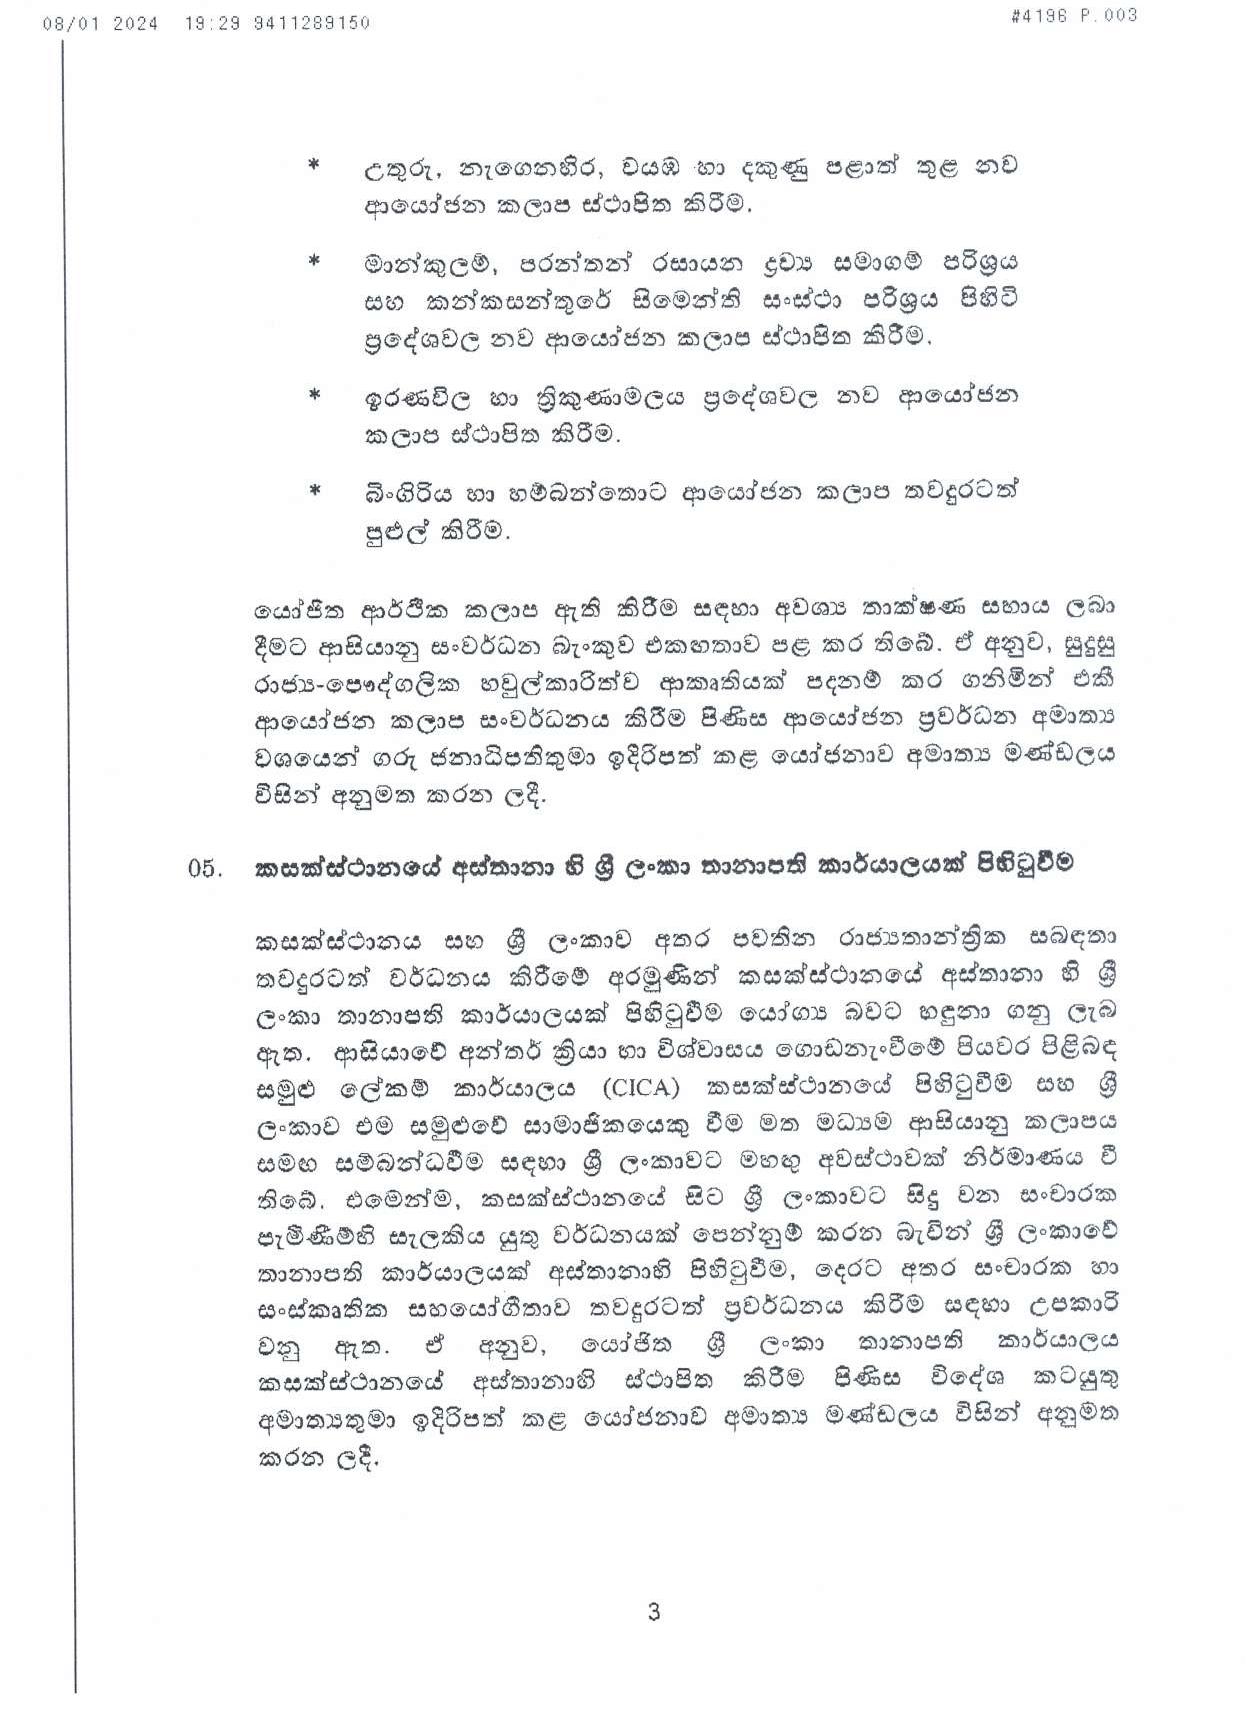 Cabinet Decision on 08.01.2024 page 003